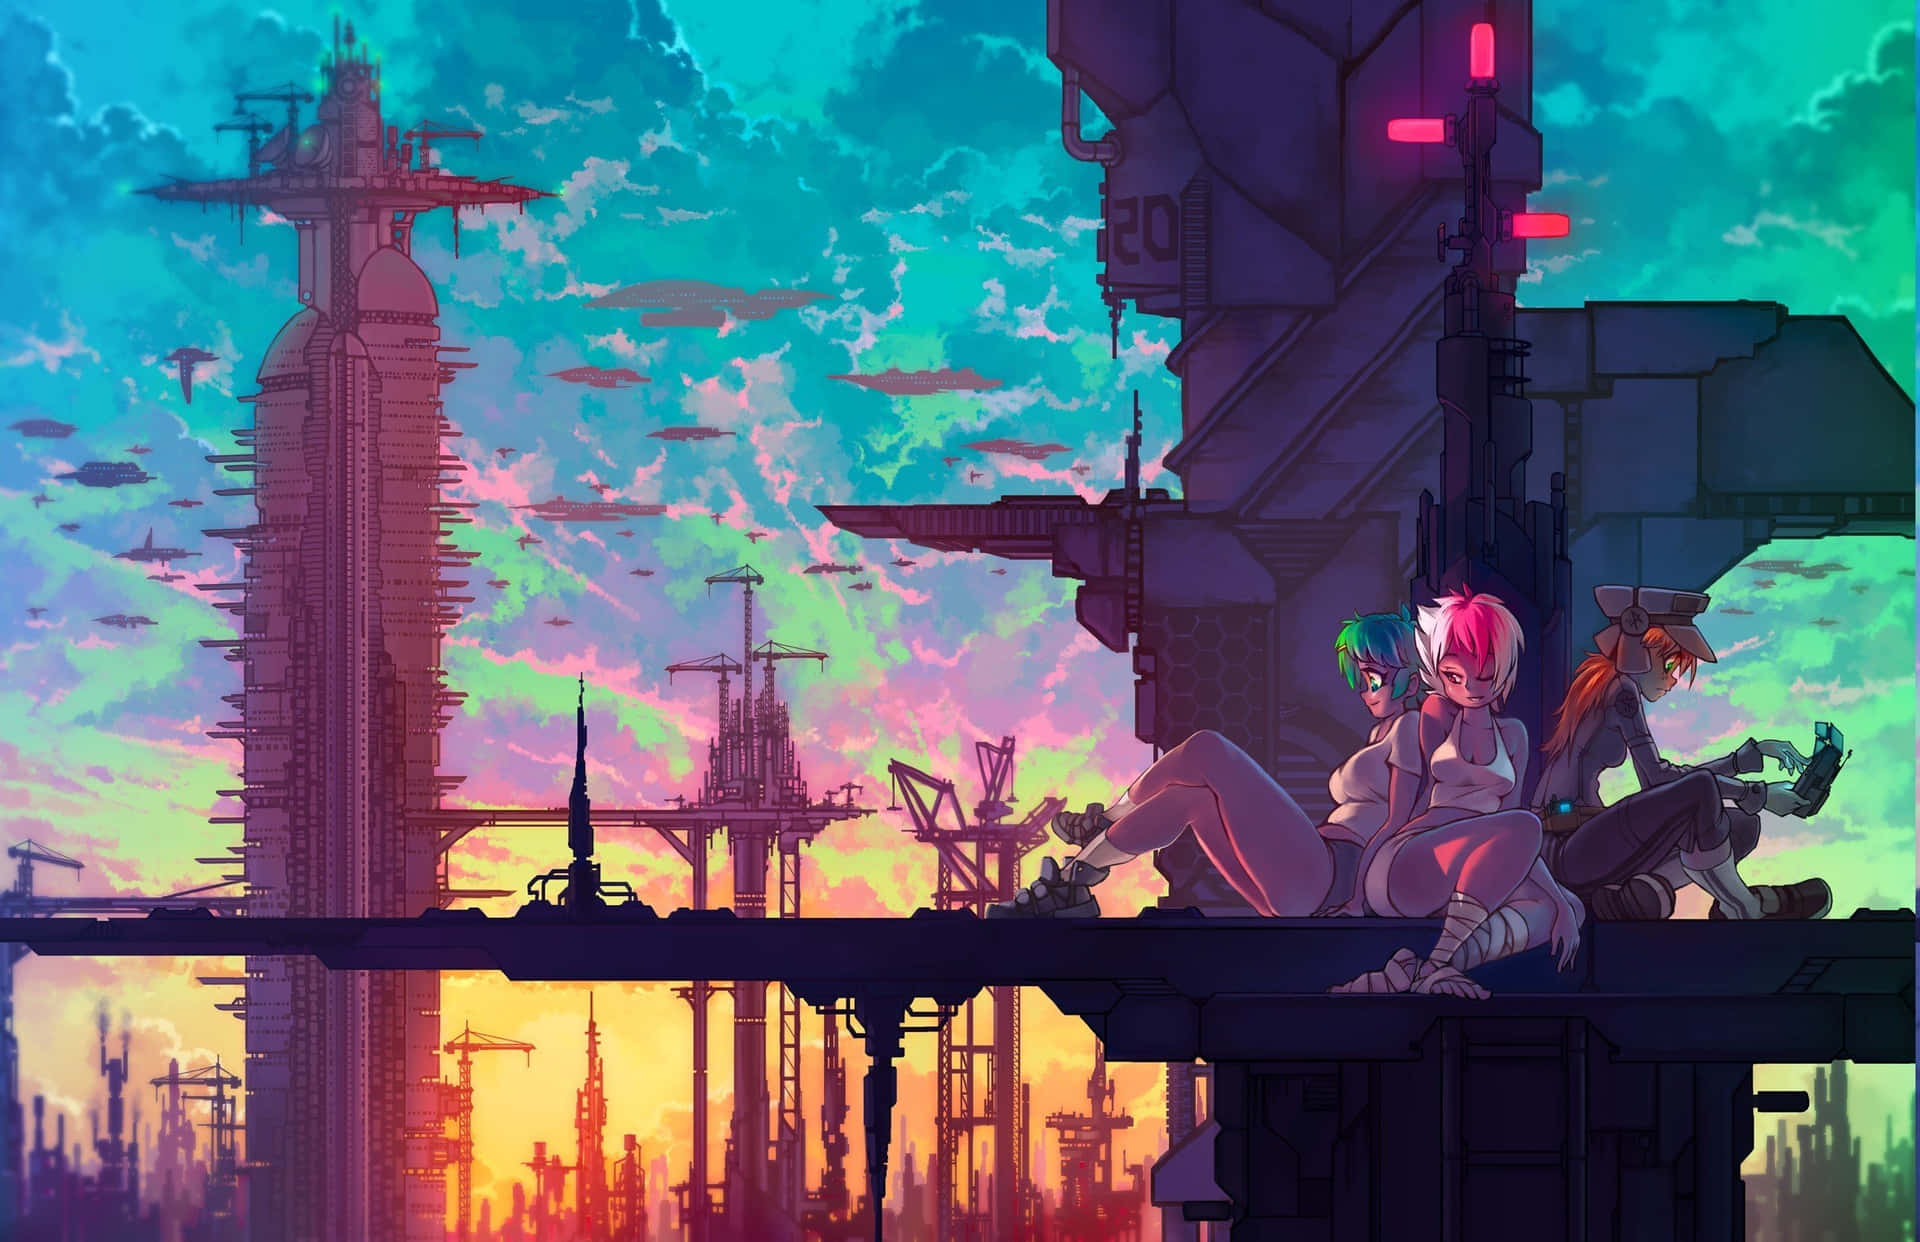 Vibrant And Colorful Fantasy World In Animation